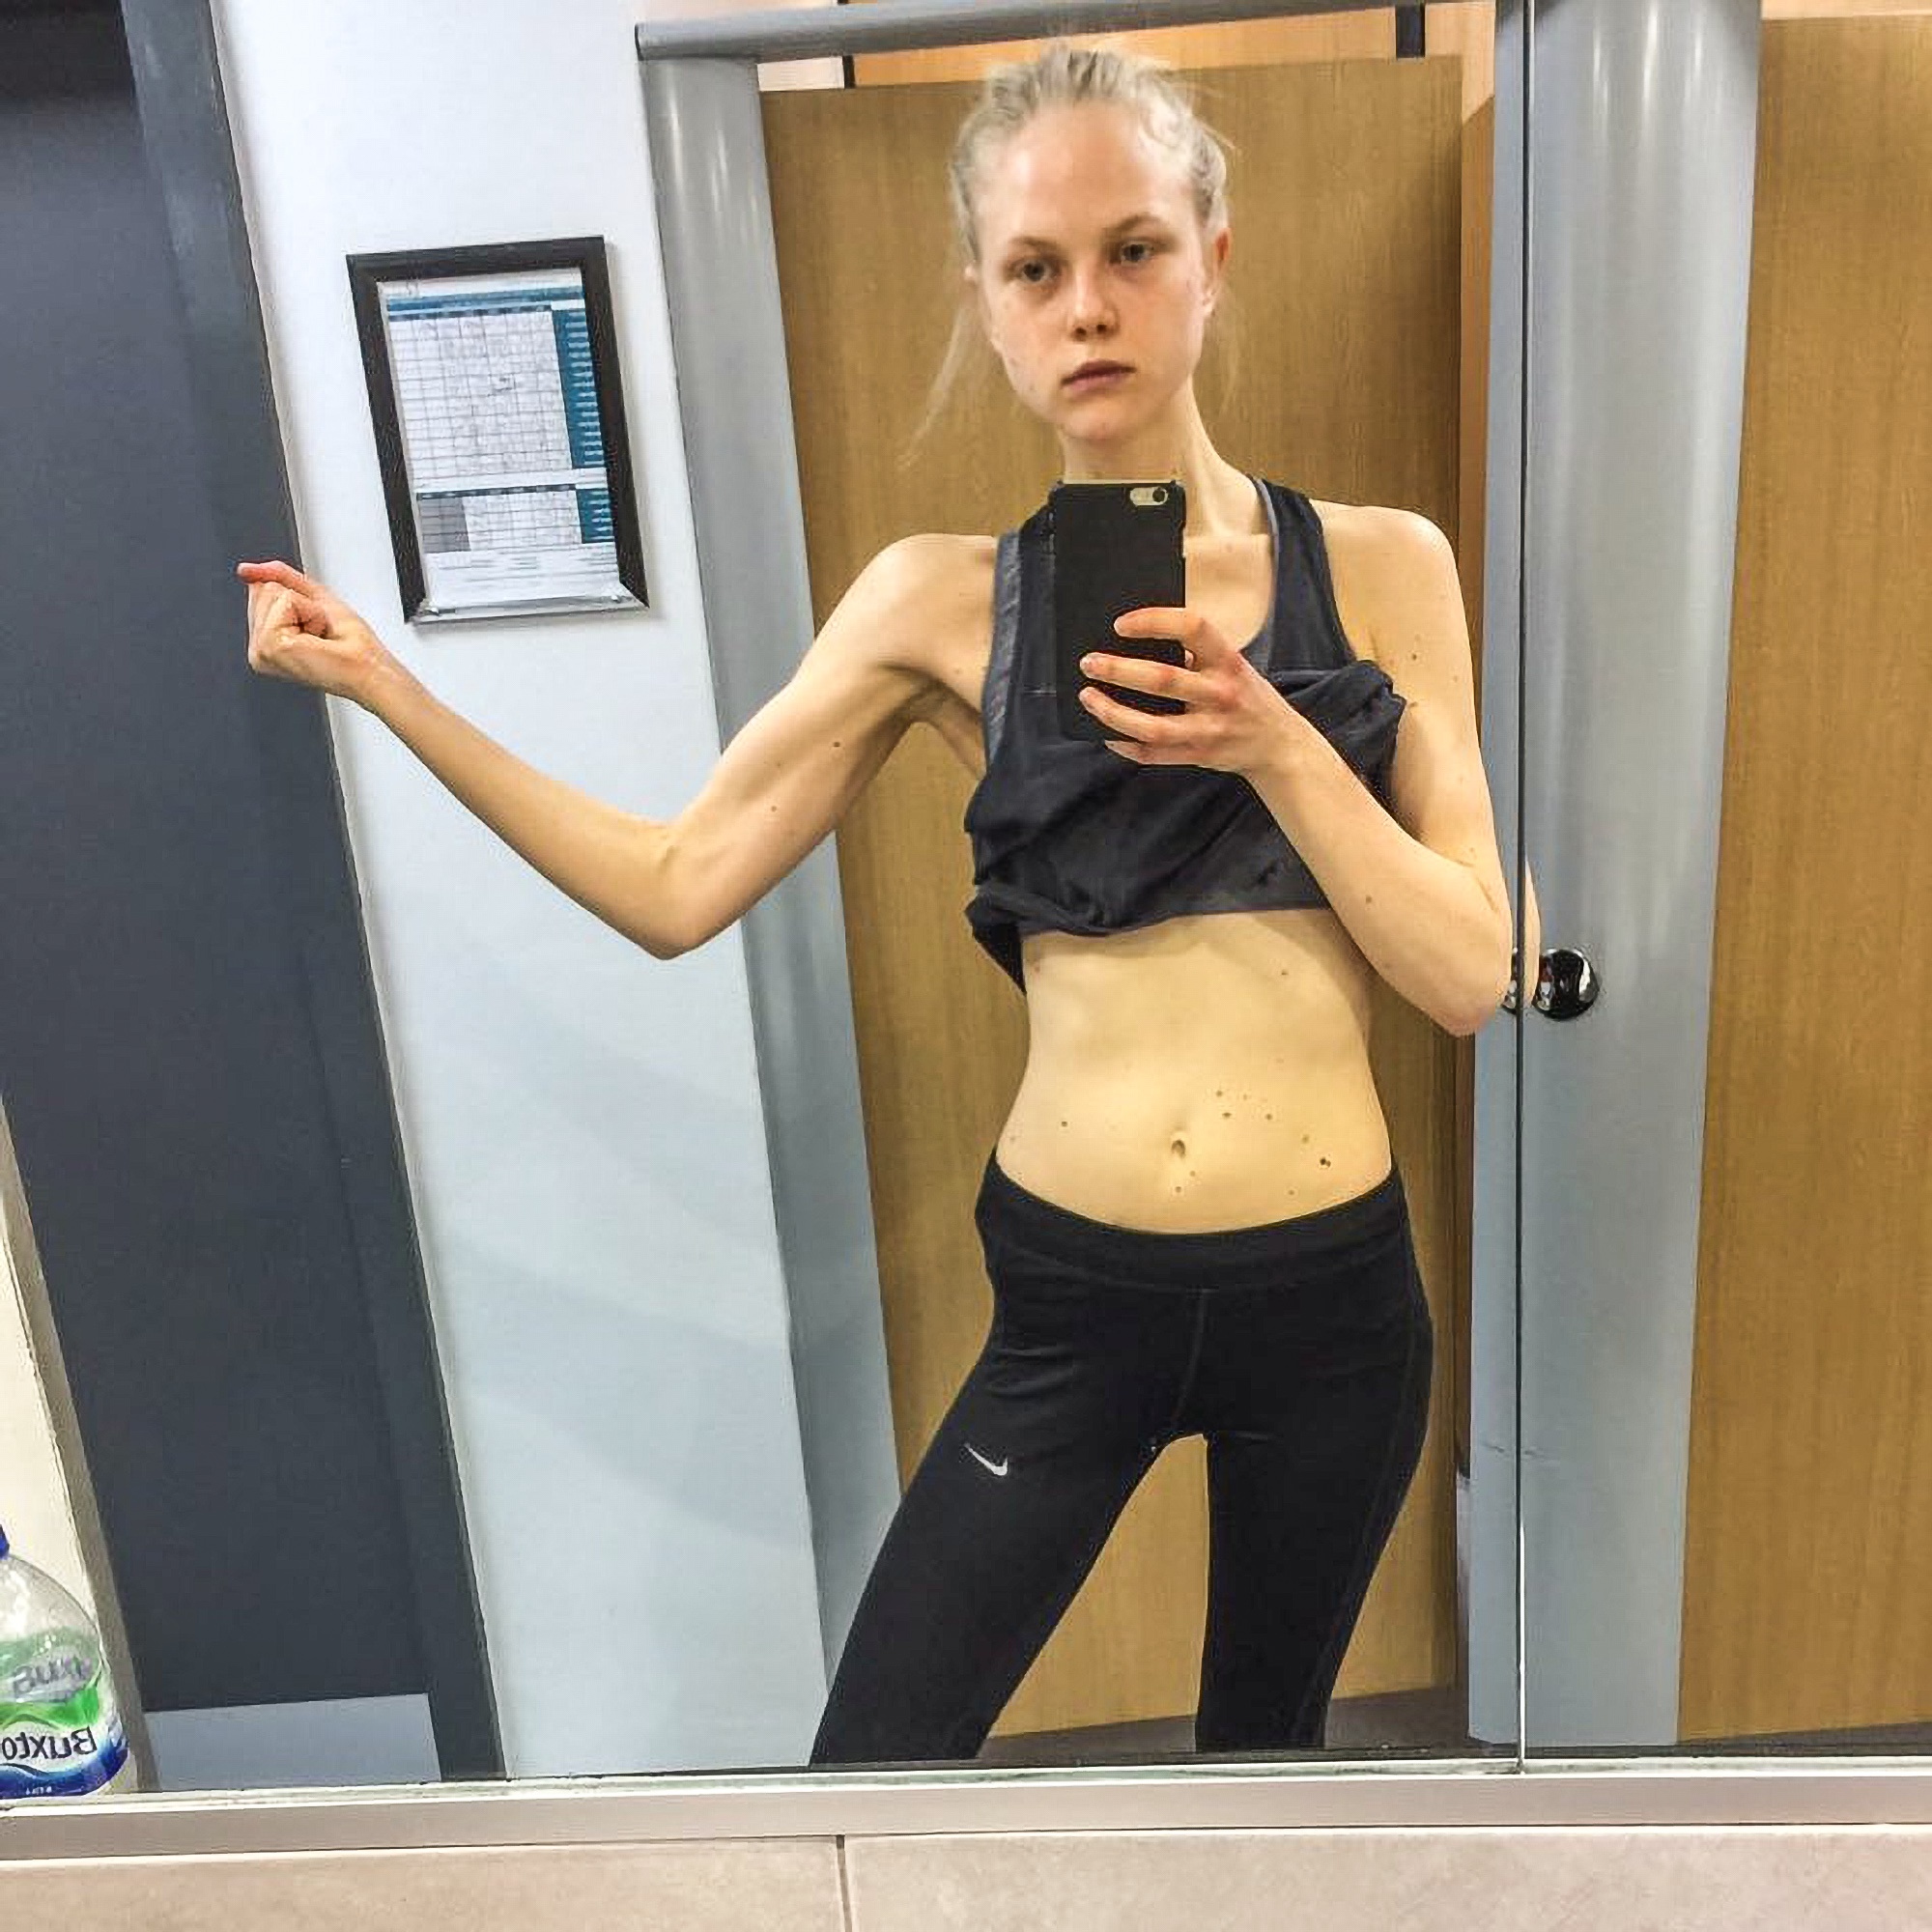 Read more about the article Top Model Reveals How Industry Created Anorexic Drug Hell